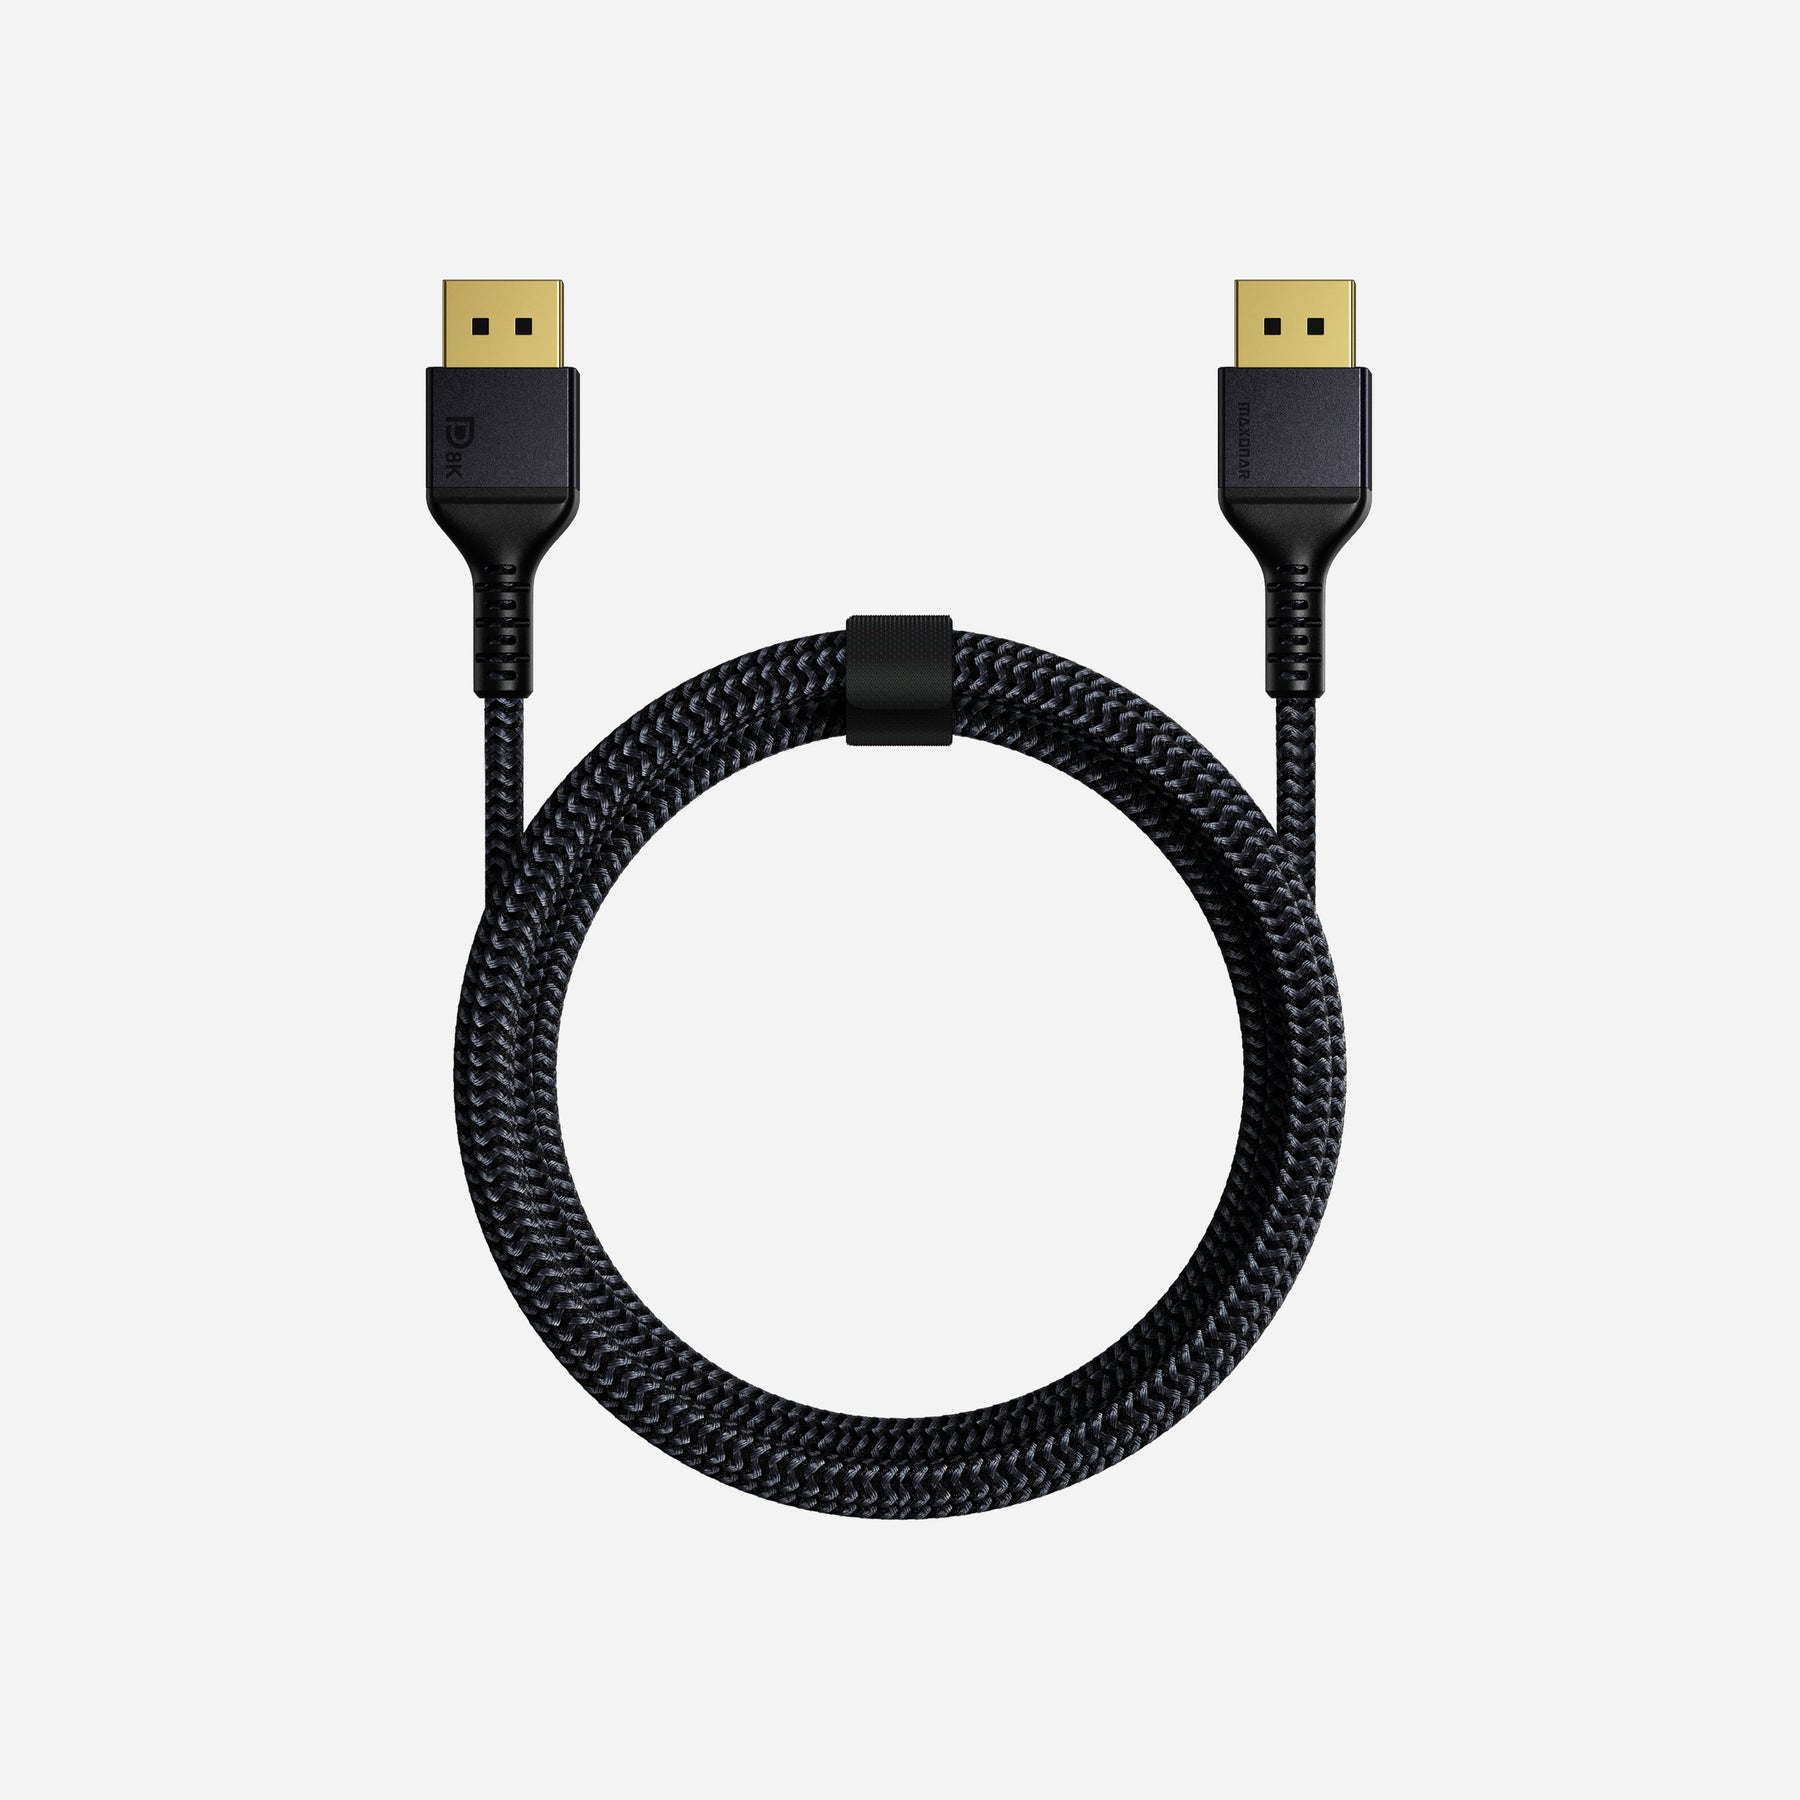  Cable Matters VESA Certified DisplayPort 2.1 Cable 1m/3.3ft,  Support 40Gbps DP40 8K 120Hz, 4K 240Hz in Black with FreeSync, G-SYNC and  HDR for Gaming Monitor, PC, RTX 4080/4090, RX 7900 